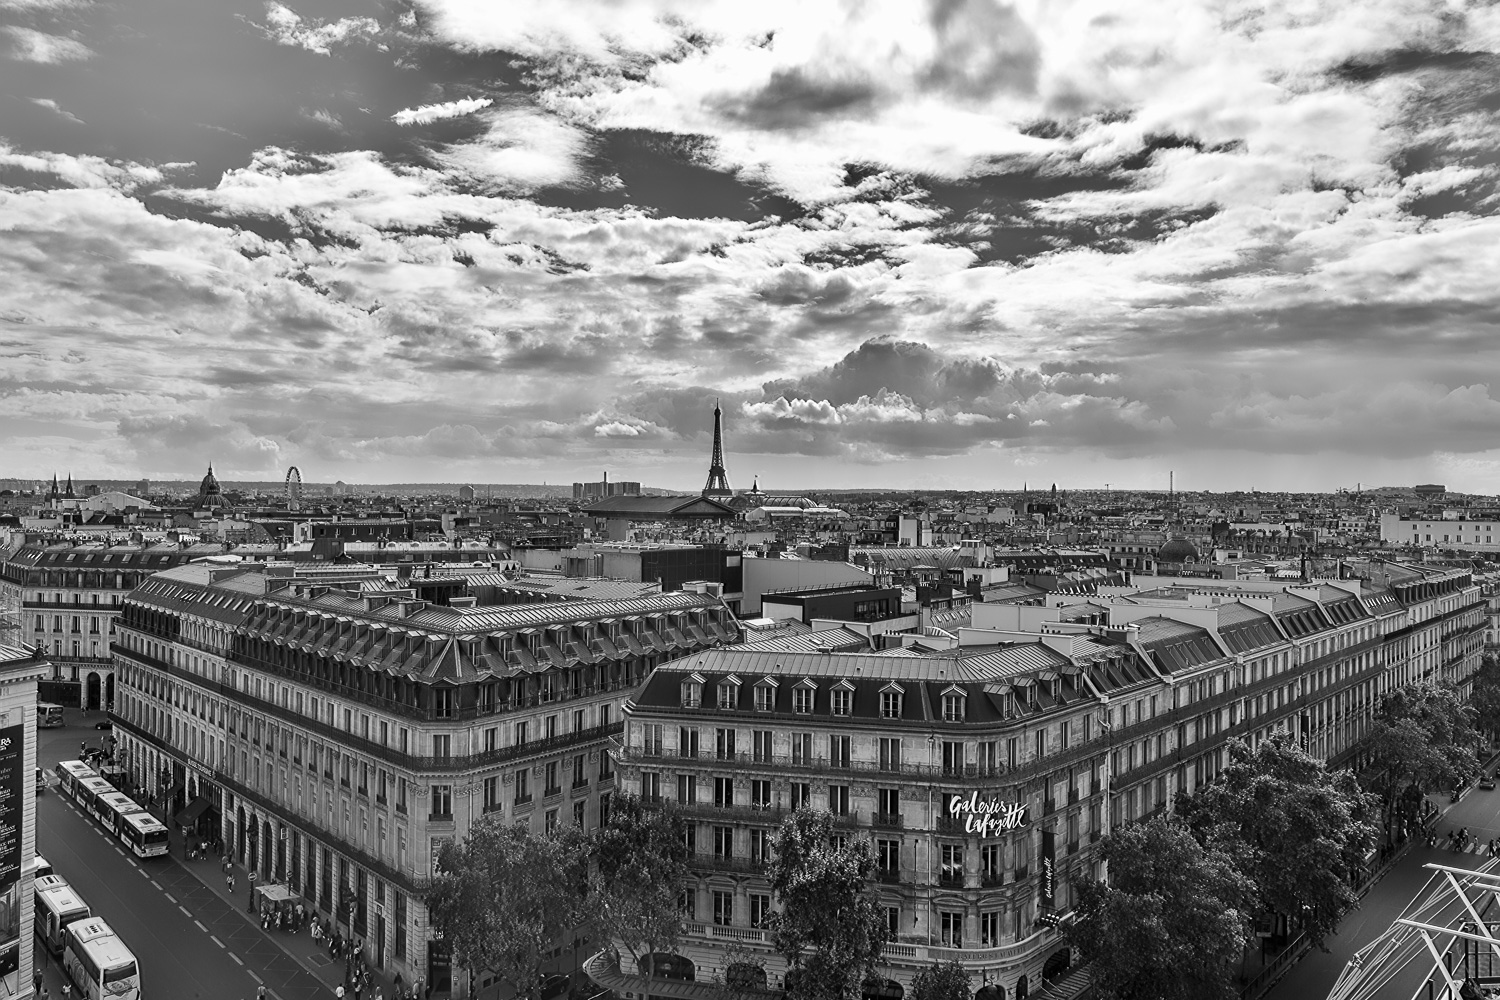 View from the Terrasse at Galeries Lafayette in Paris